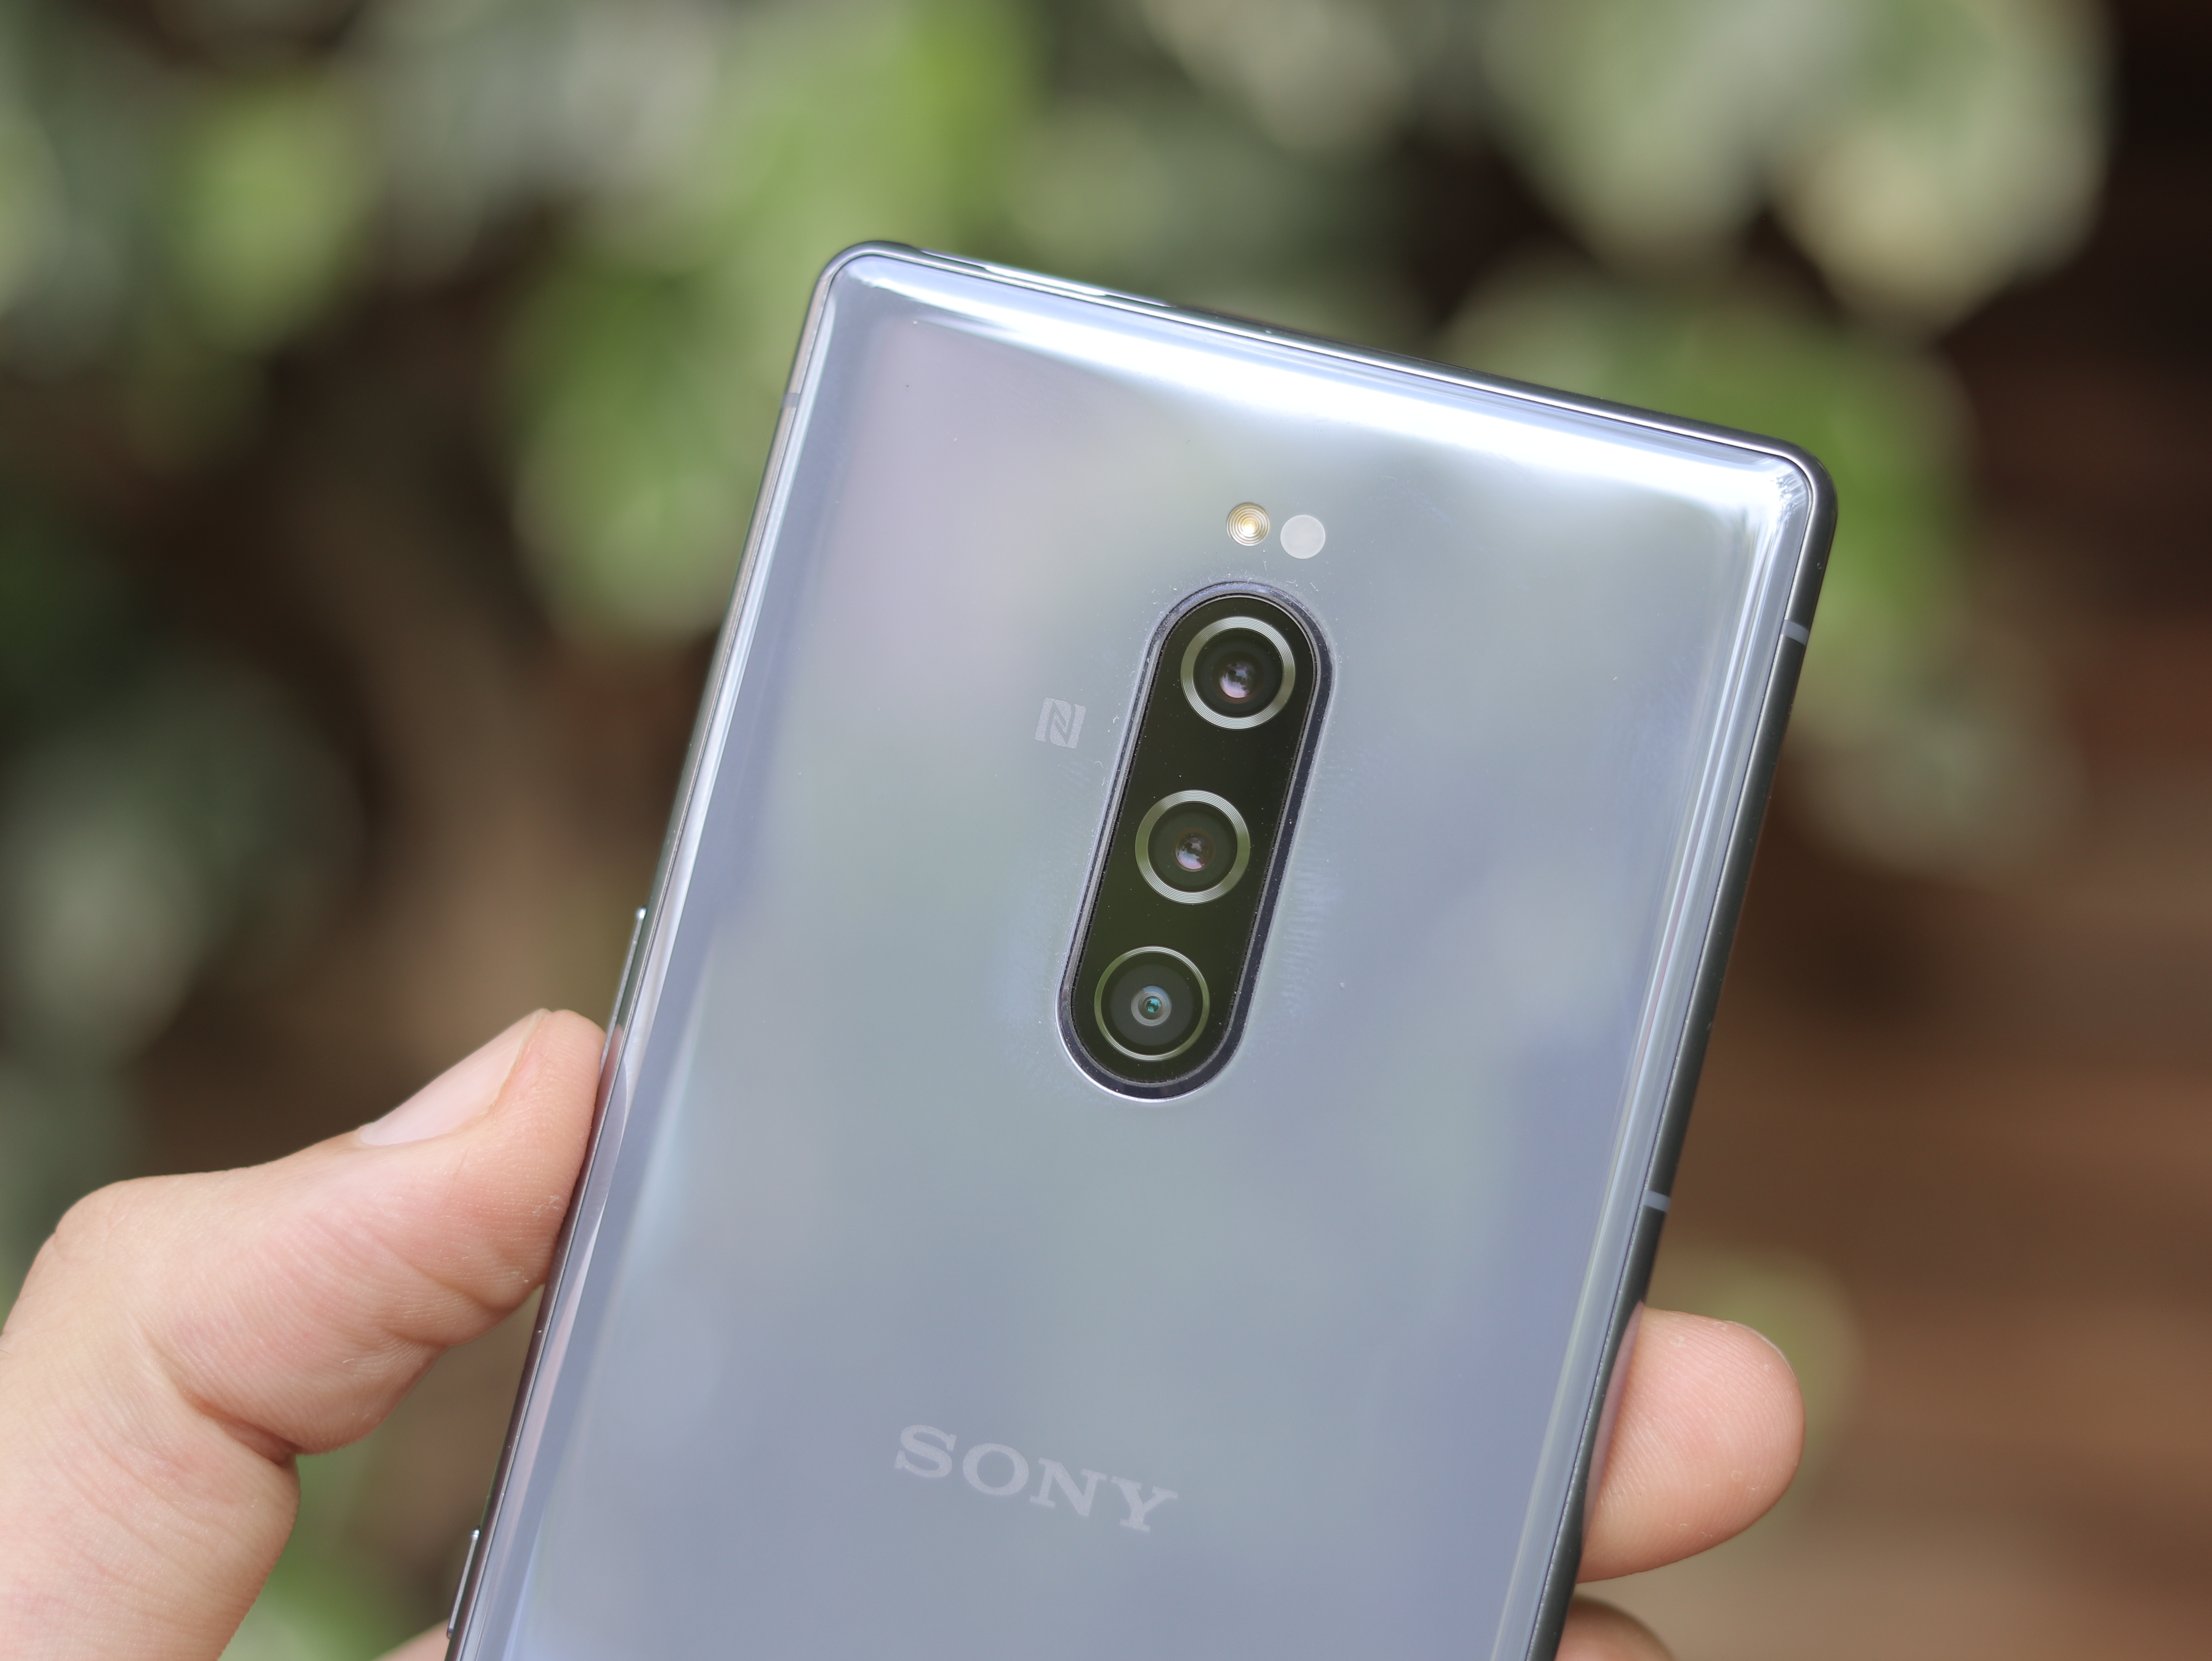 Camera: Sony’s best, but not the best